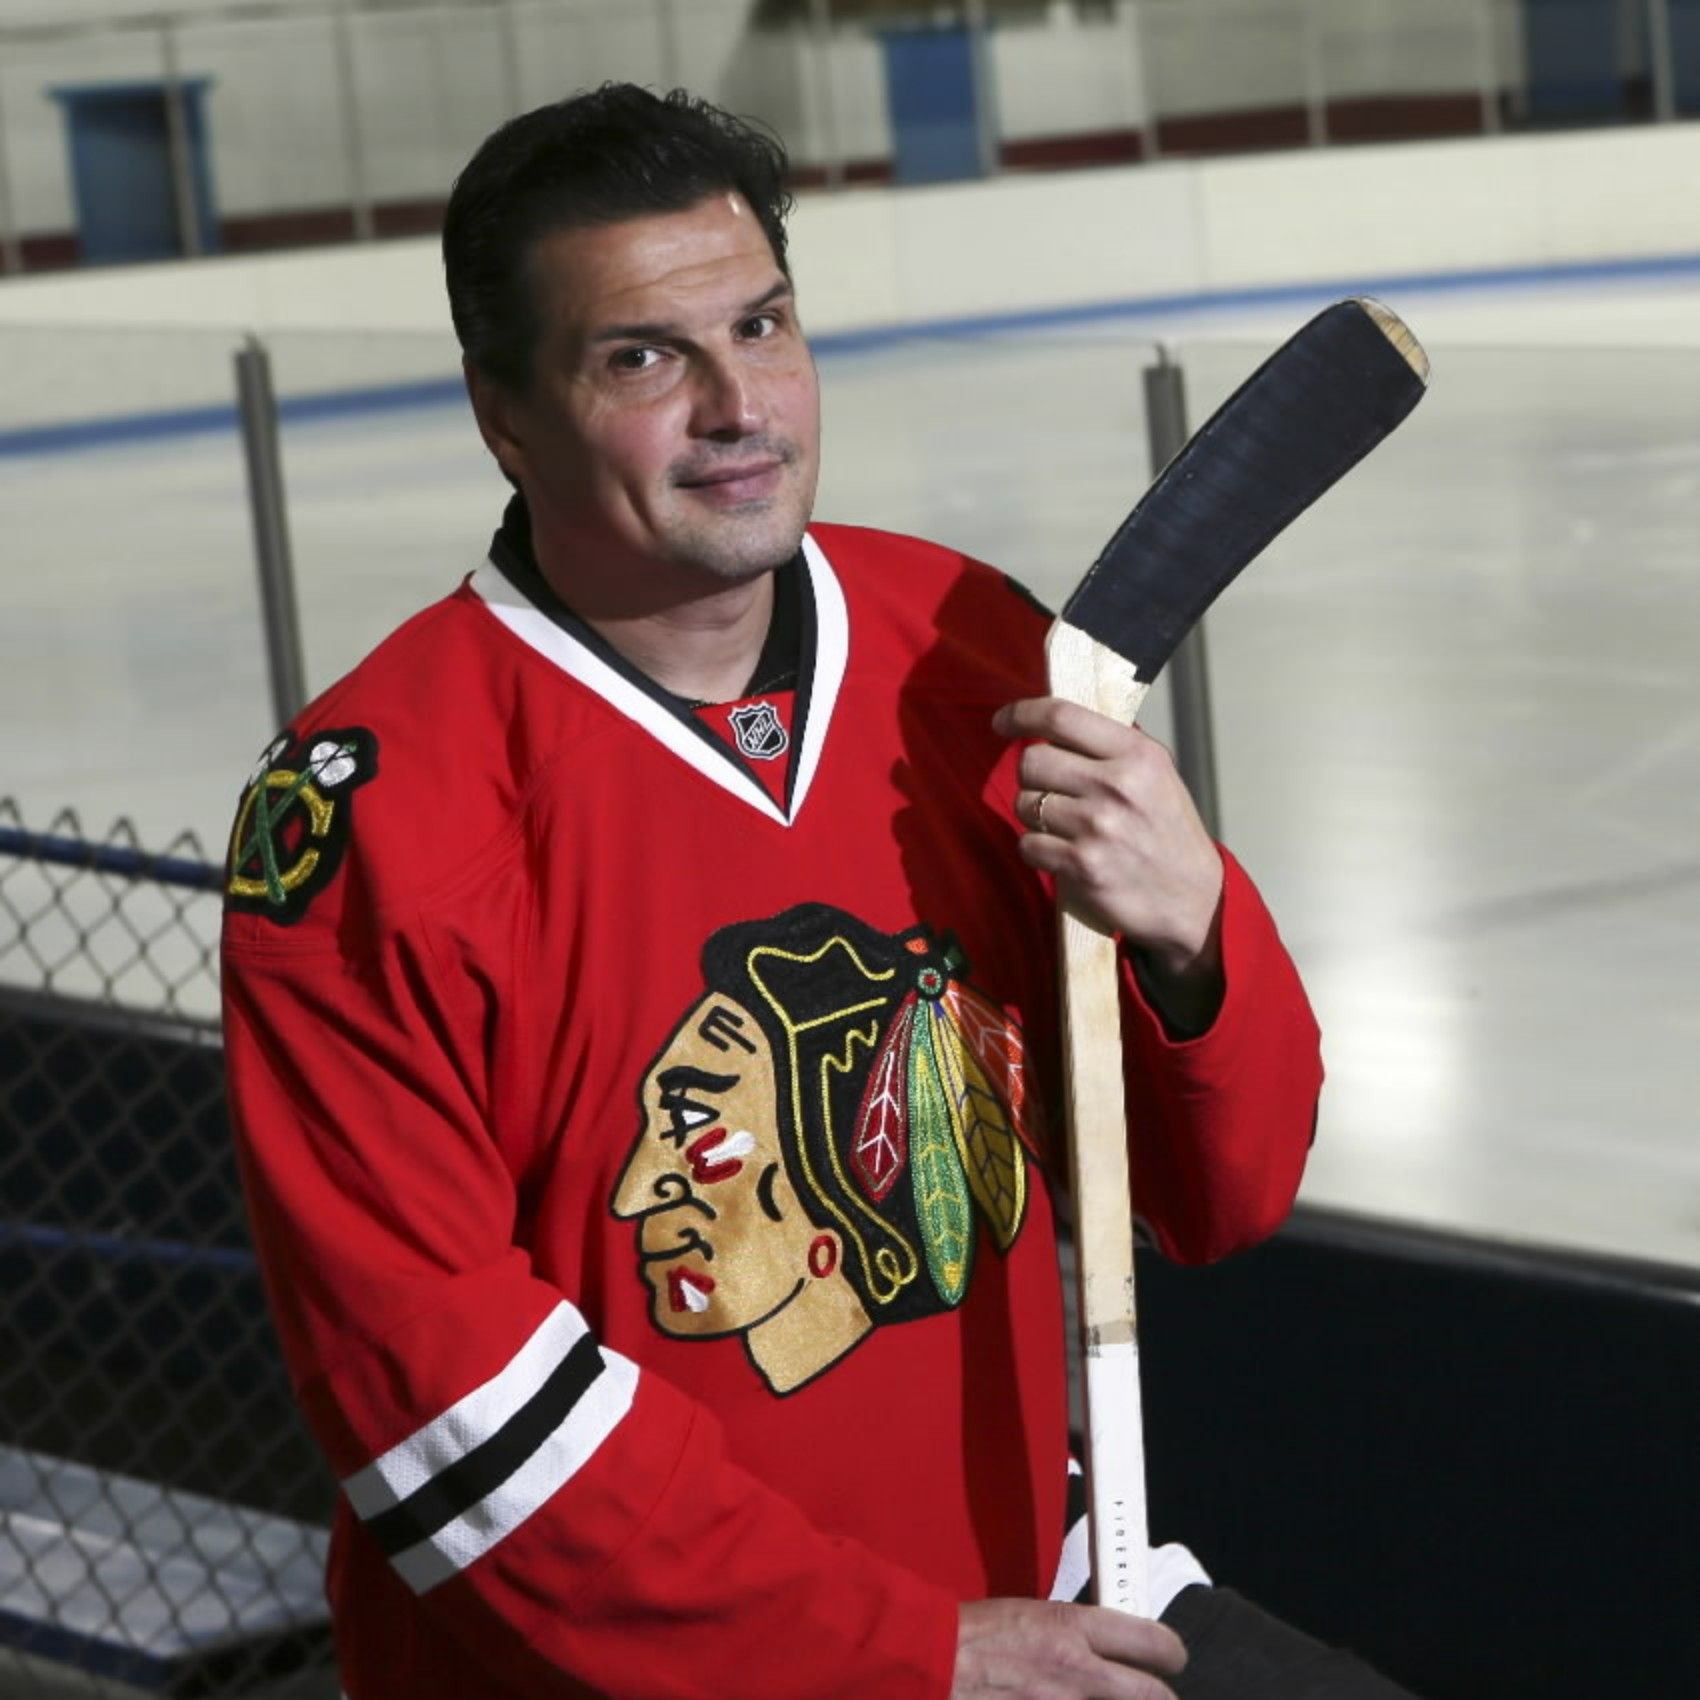 Great to talk to Blackhawks legend Eddie Olczyk 🏒  Great to talk to  Blackhawks legend Eddie Olczyk as he spent time in Indianapolis with his son,  Nick, and the Indy Fuel